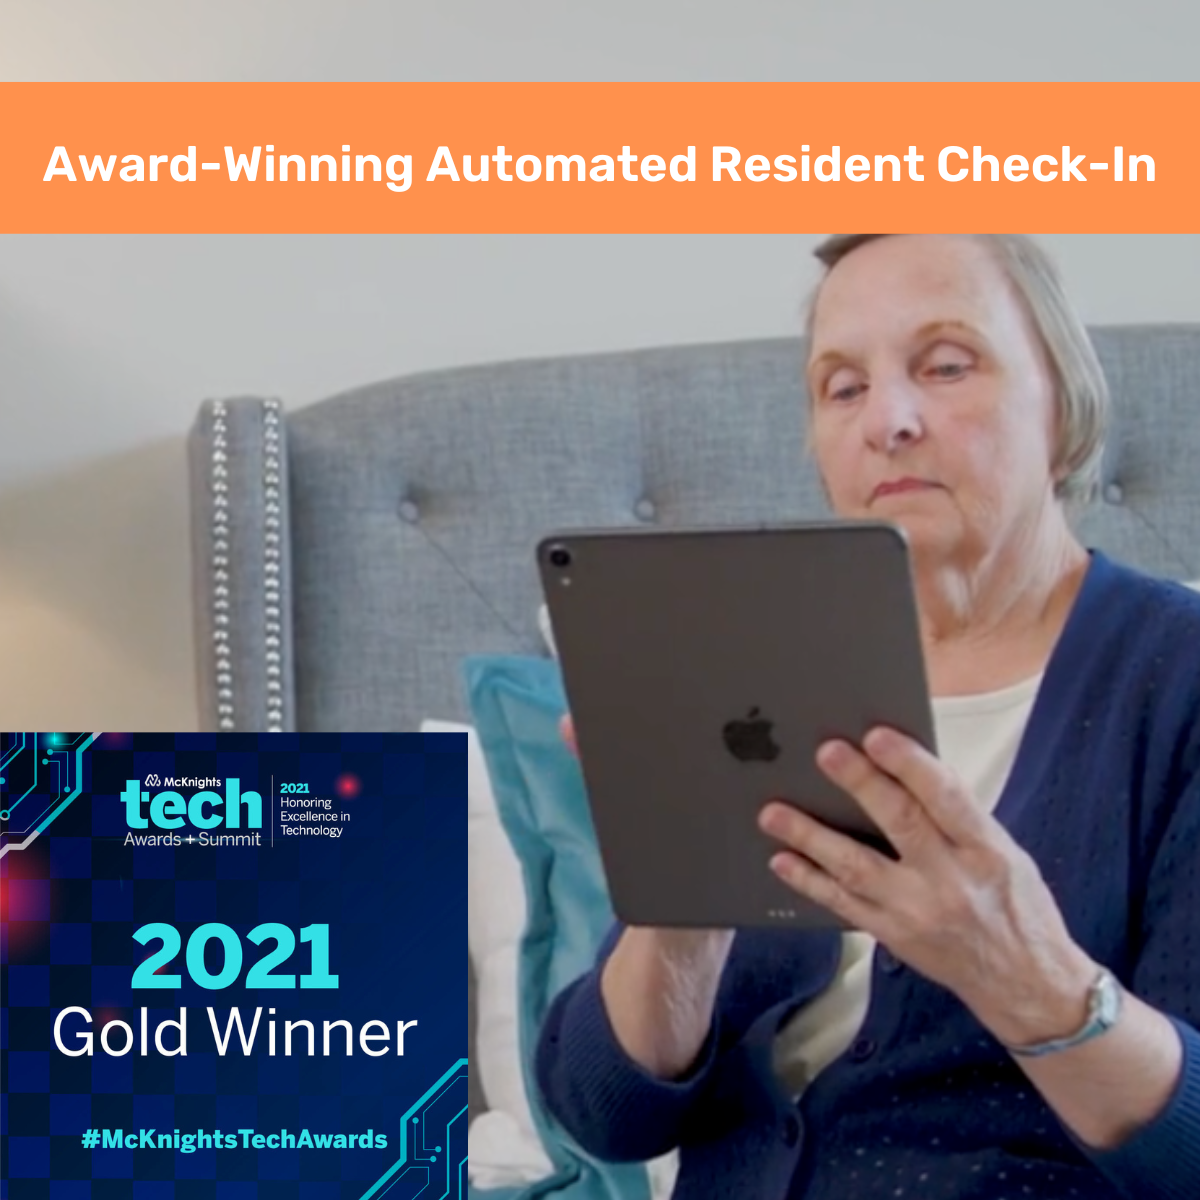 An older adult woman looks at an ipad and a graphic shows the K4Connect Smart Home award for its resident check-in solution